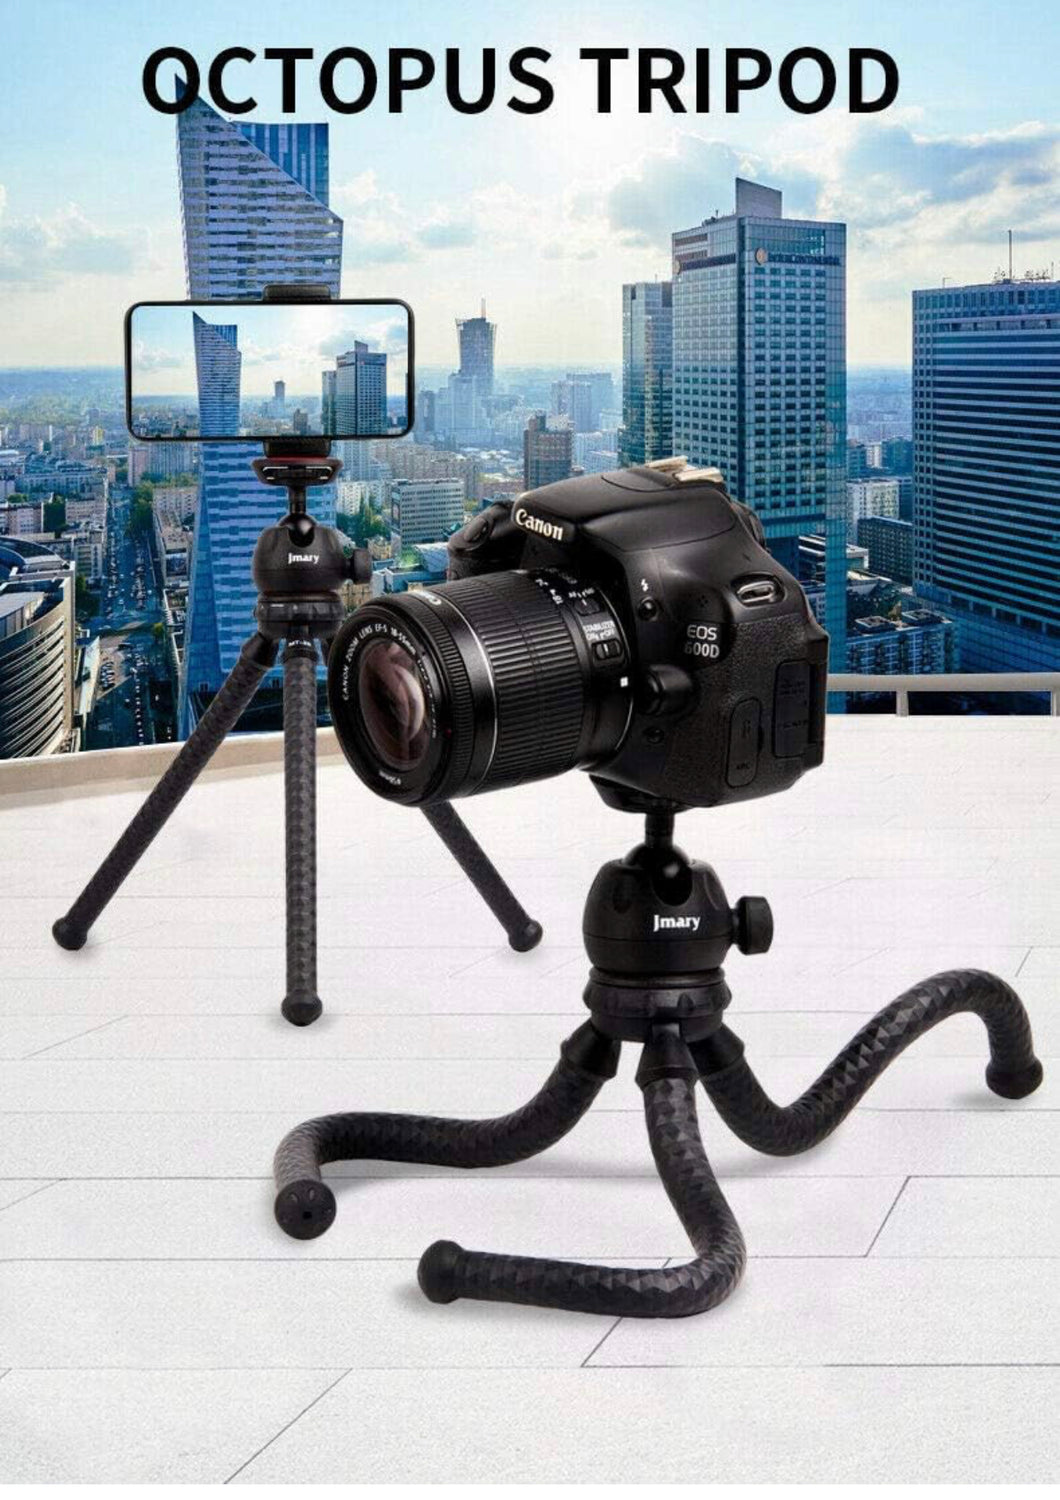 JMARY MT-25 - Table Top Mini Portable Flexible Tripod Stand for Mobile Phones and DSLR & Digital Cameras